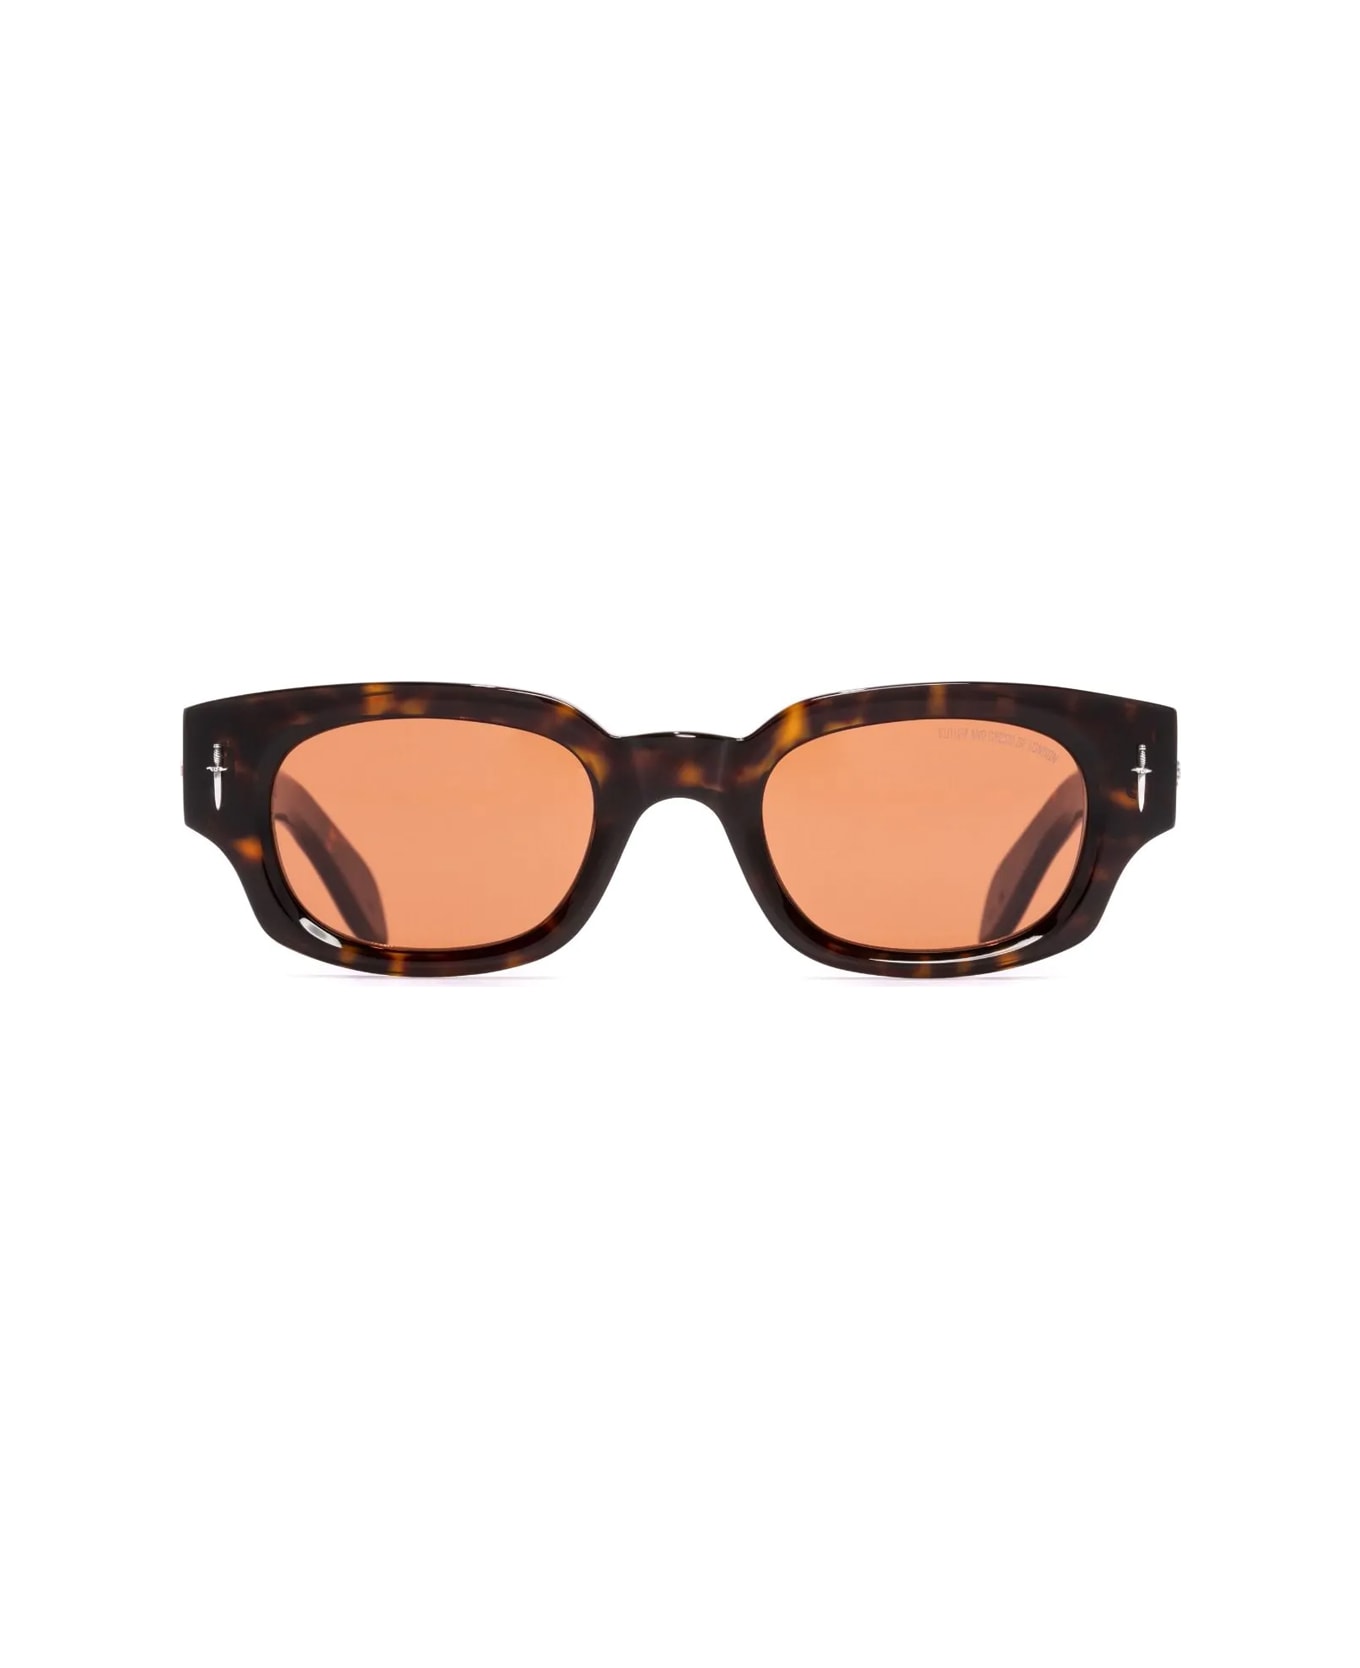 Cutler and Gross Great Frog 004 02 Sunglasses - Marrone サングラス